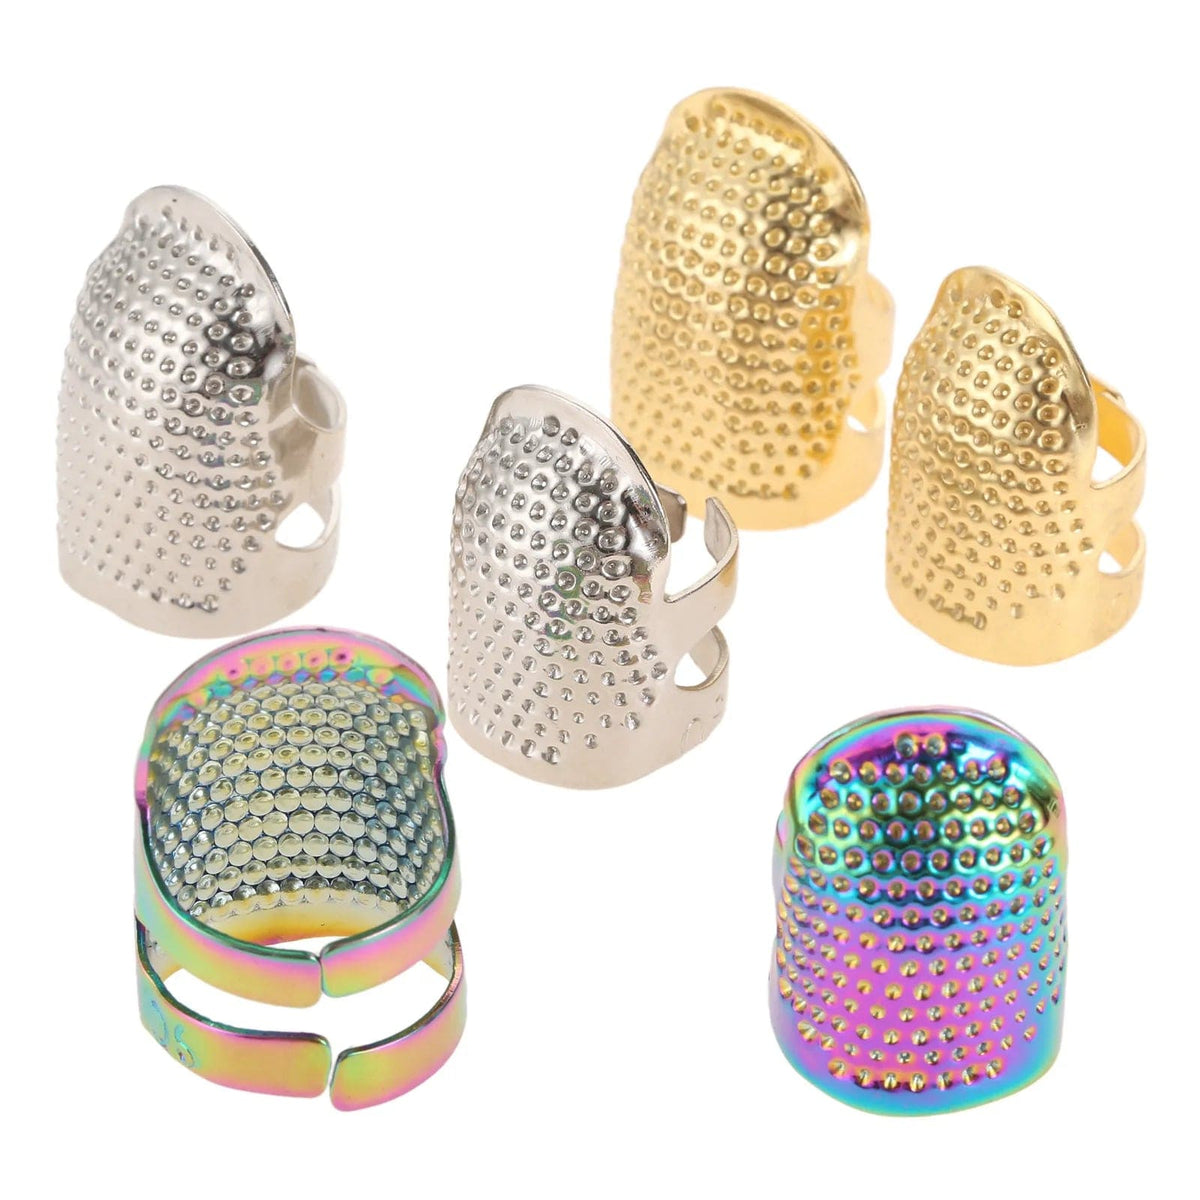 Retro Sewing Thimble Finger Protector Ring Sewing Knitting Accessories  Tools